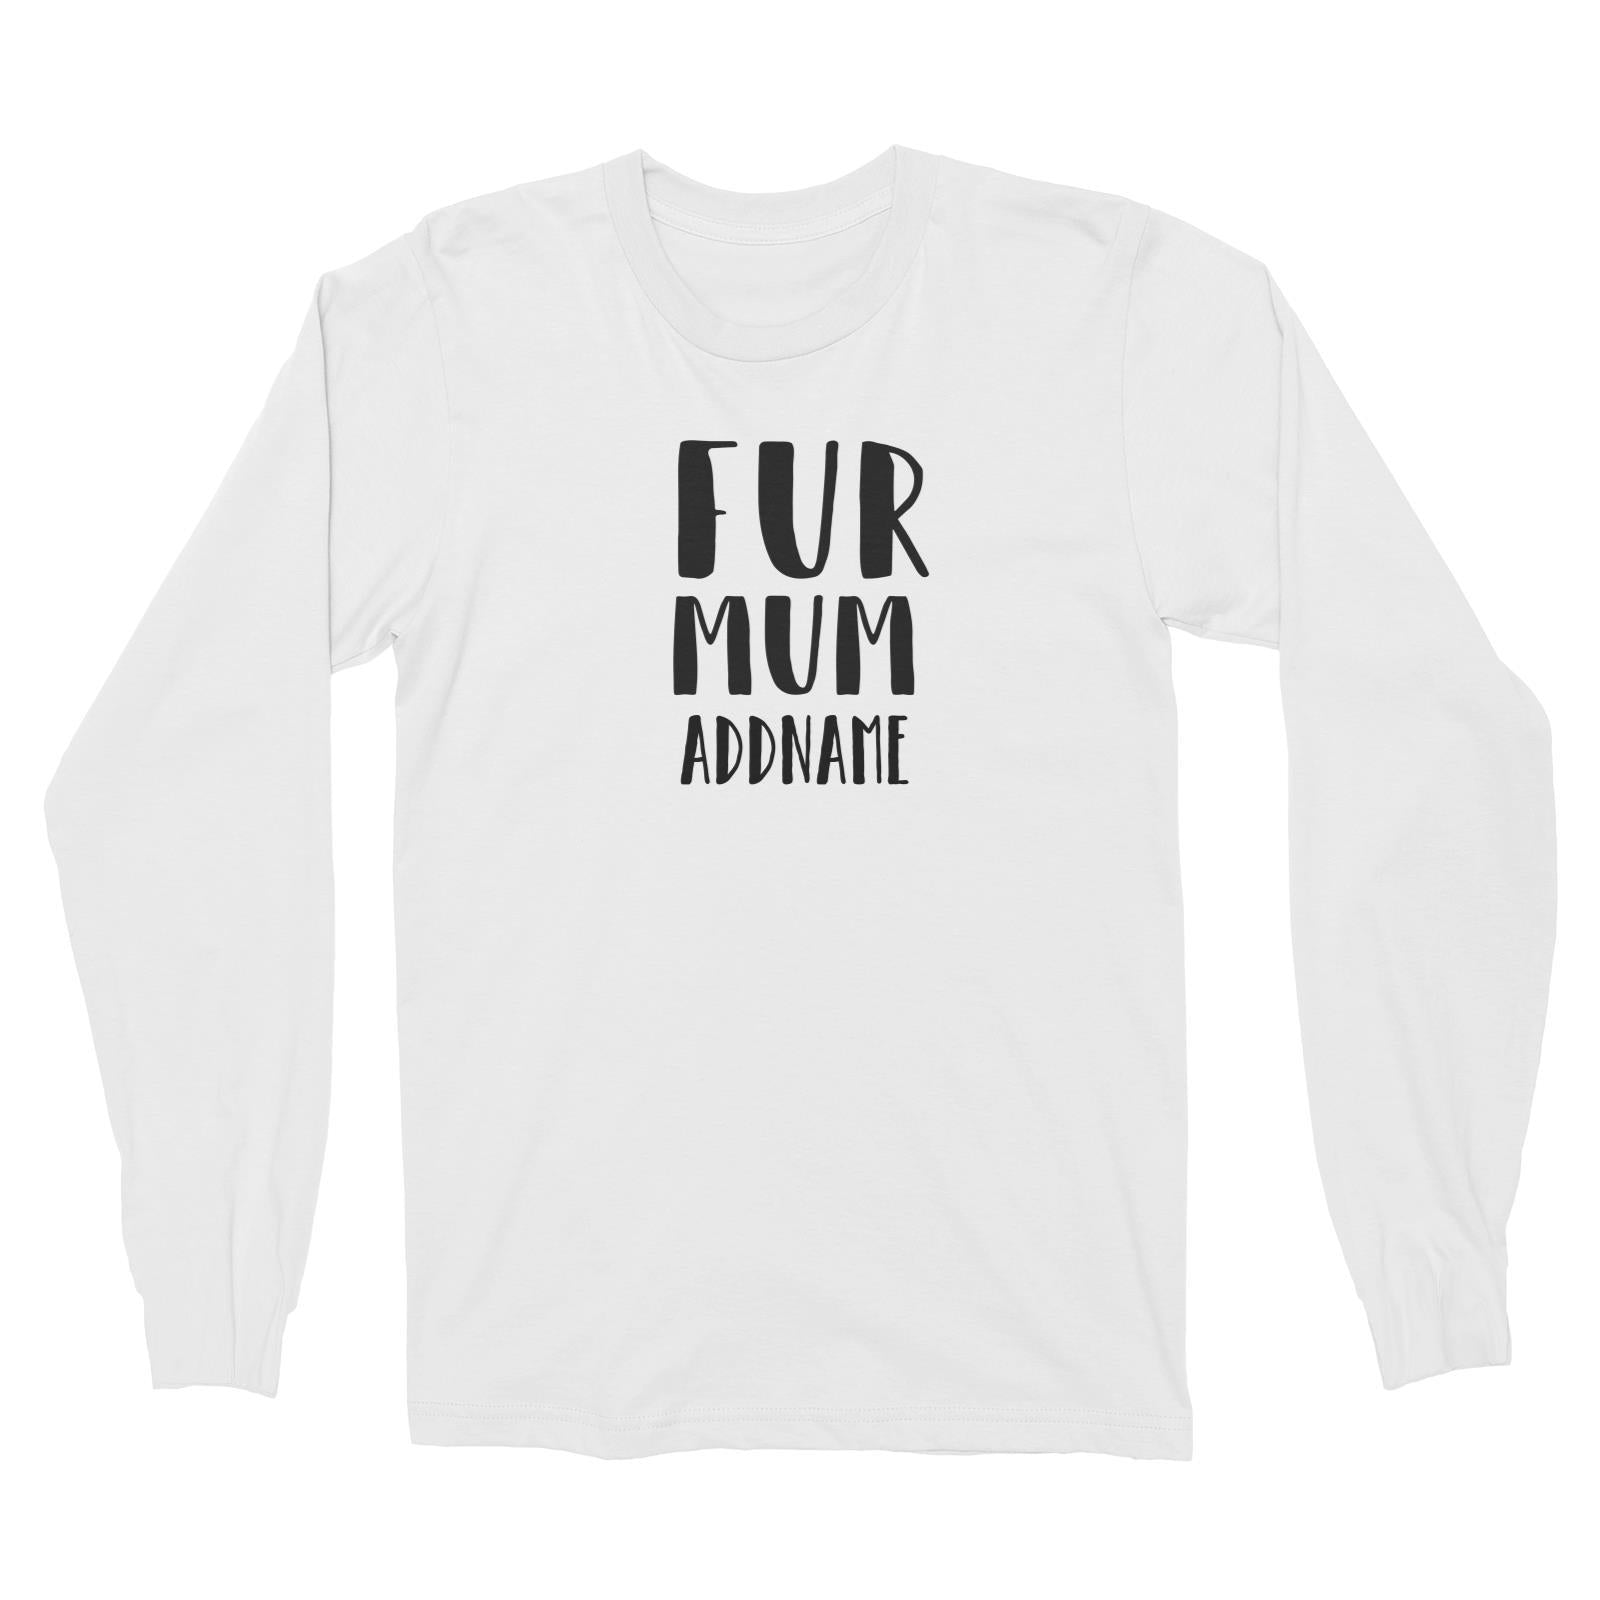 Matching Dog And Owner Fur Mum Family Addname Long Sleeve Unisex T-Shirt